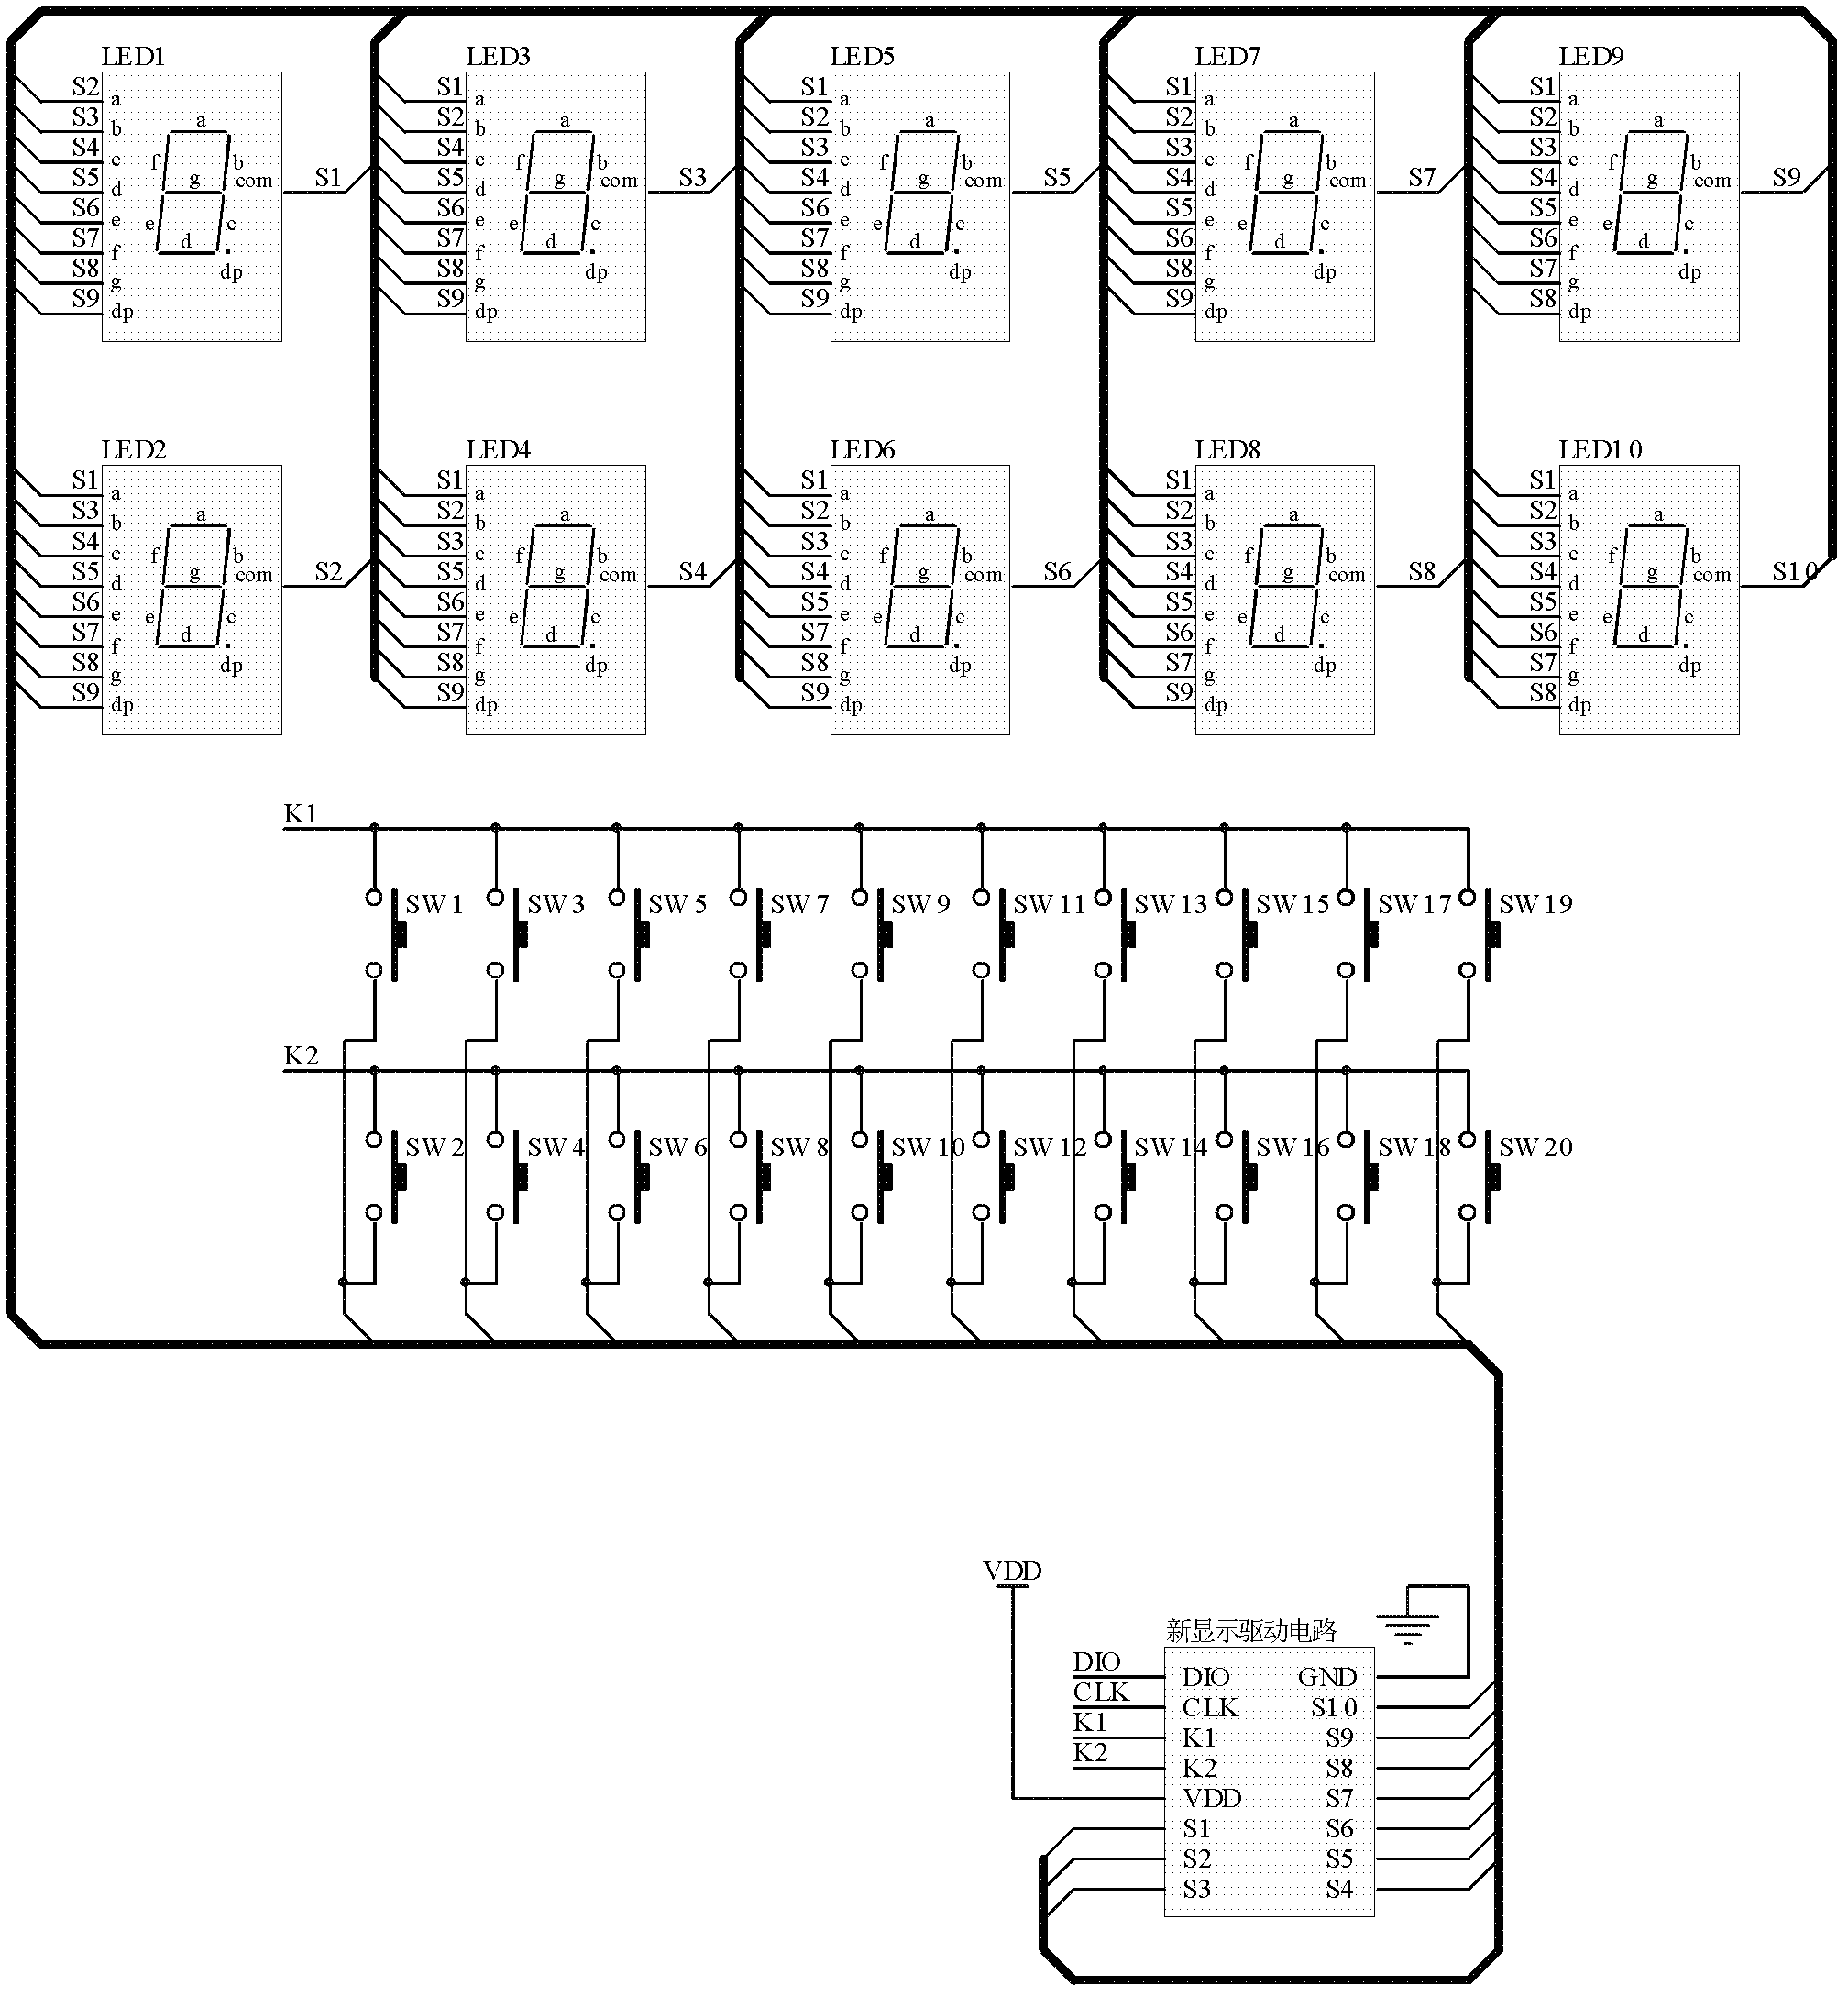 Multi-section nixie tube display drive circuit structure